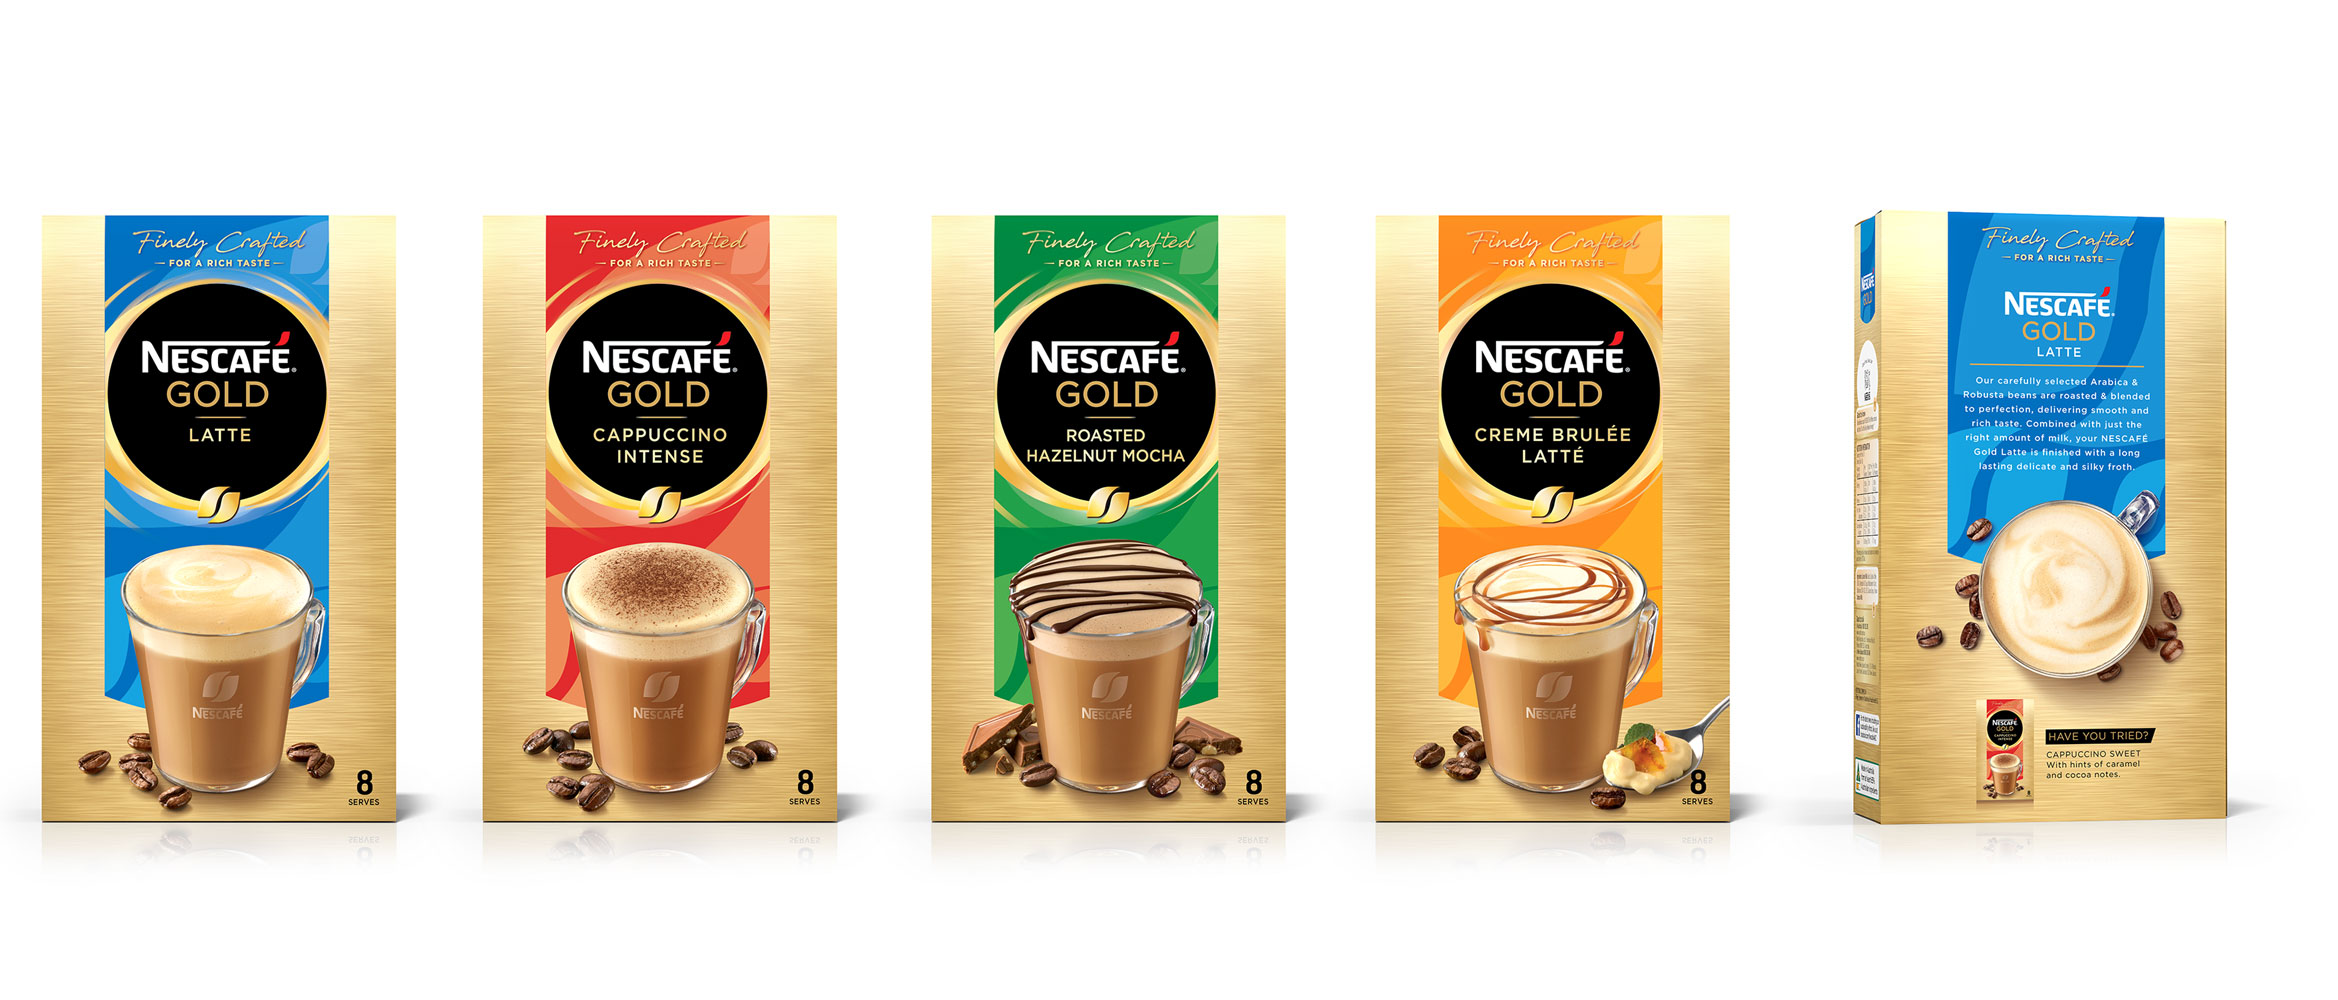 Nescafe Gold partners with Christy Ng for a limited edition carrier